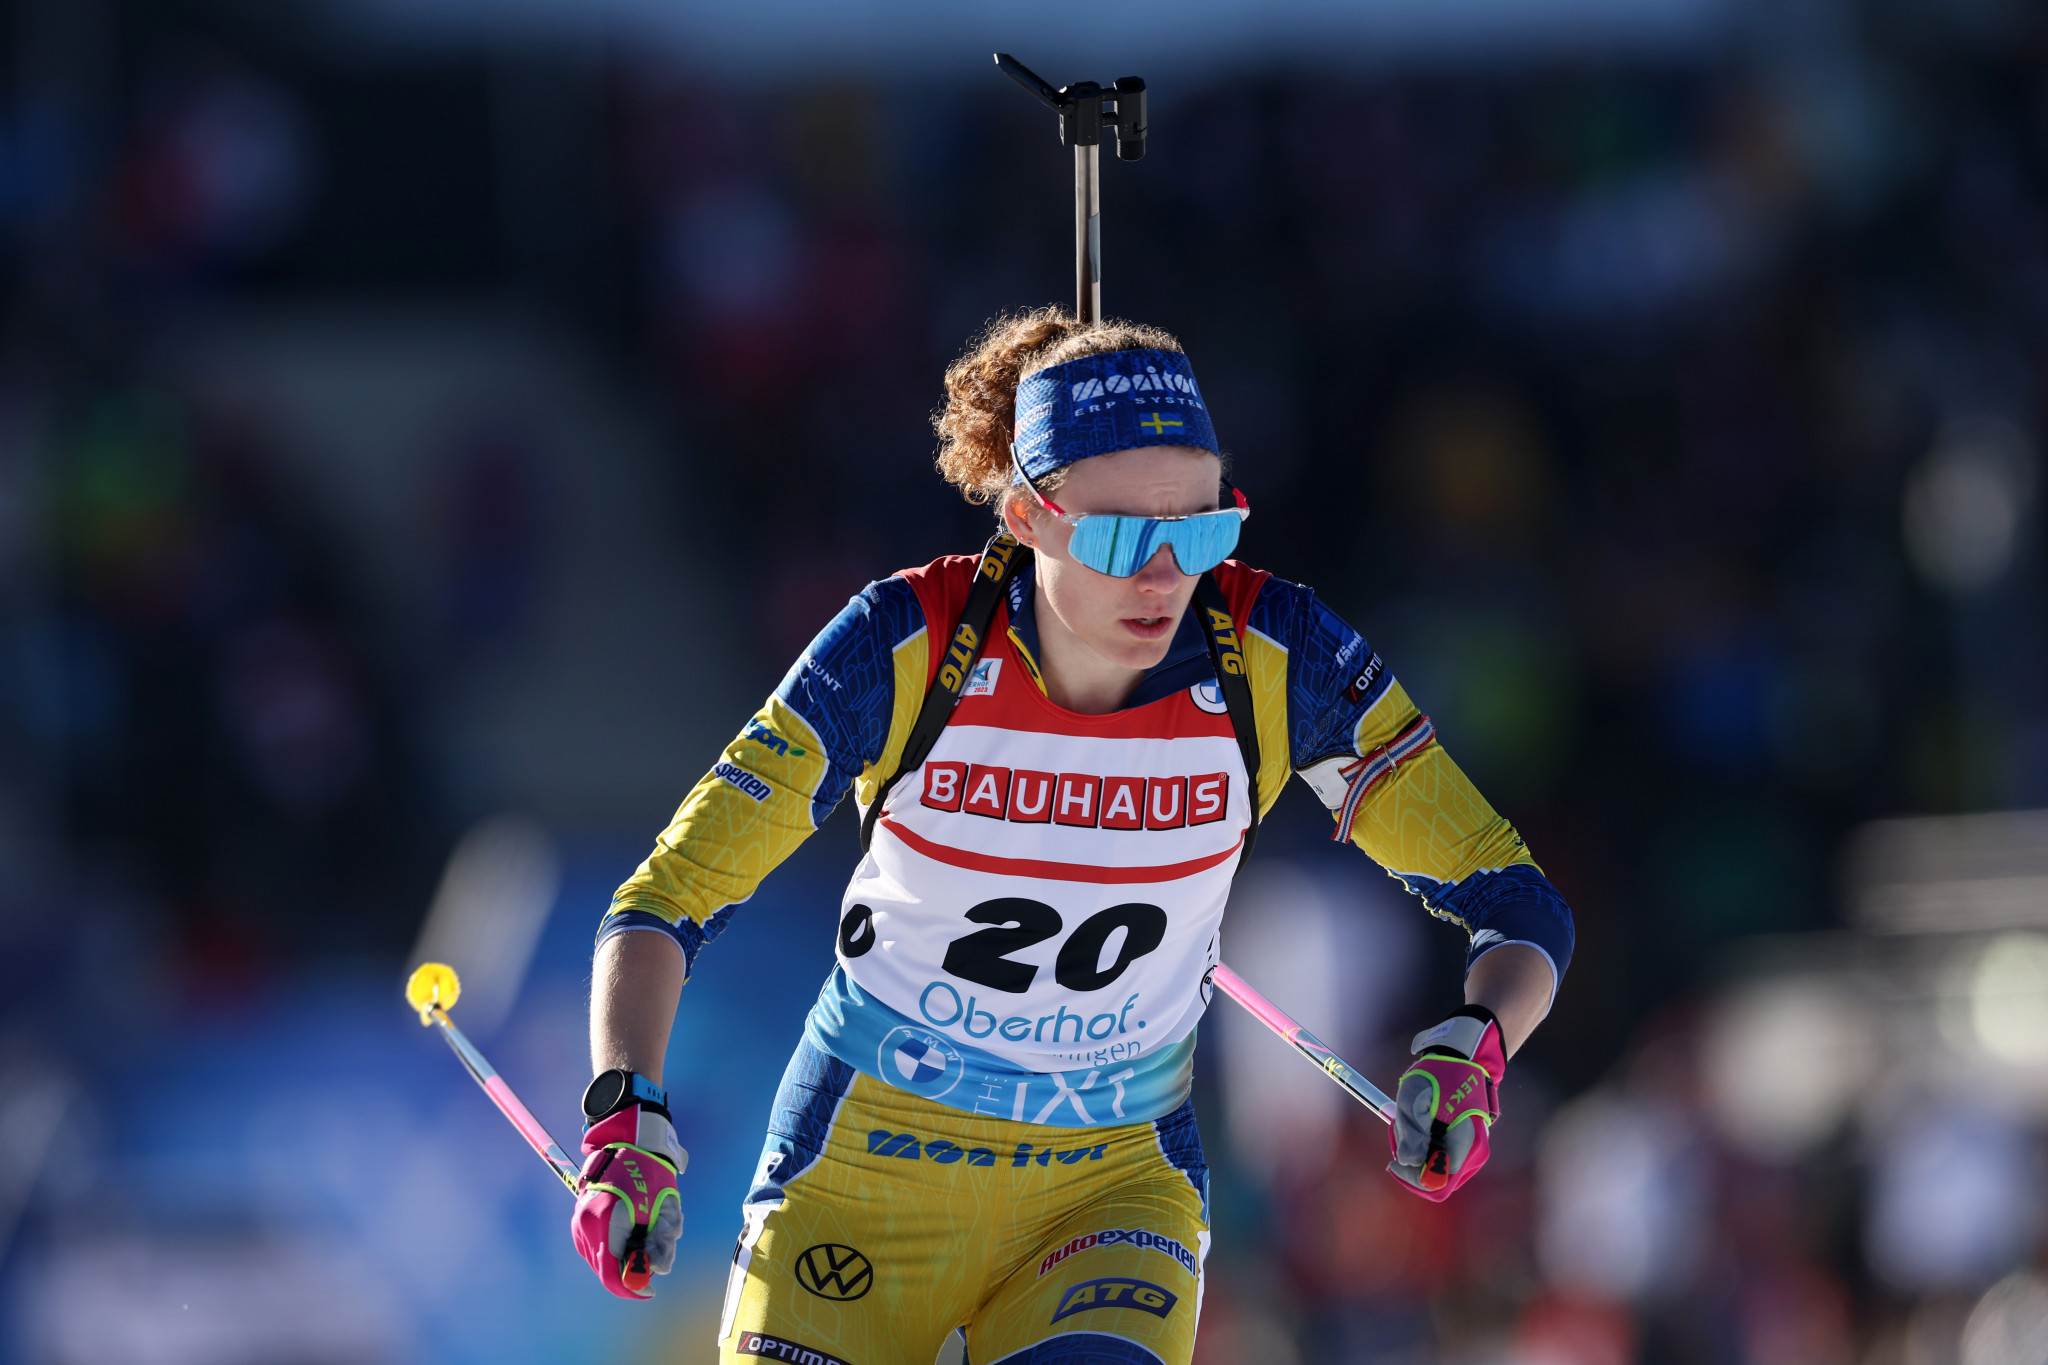 Hanna Öberg won World Championship gold on the fifth anniversary of her Olympic victory at Pyeongchang 2018 ©Getty Images